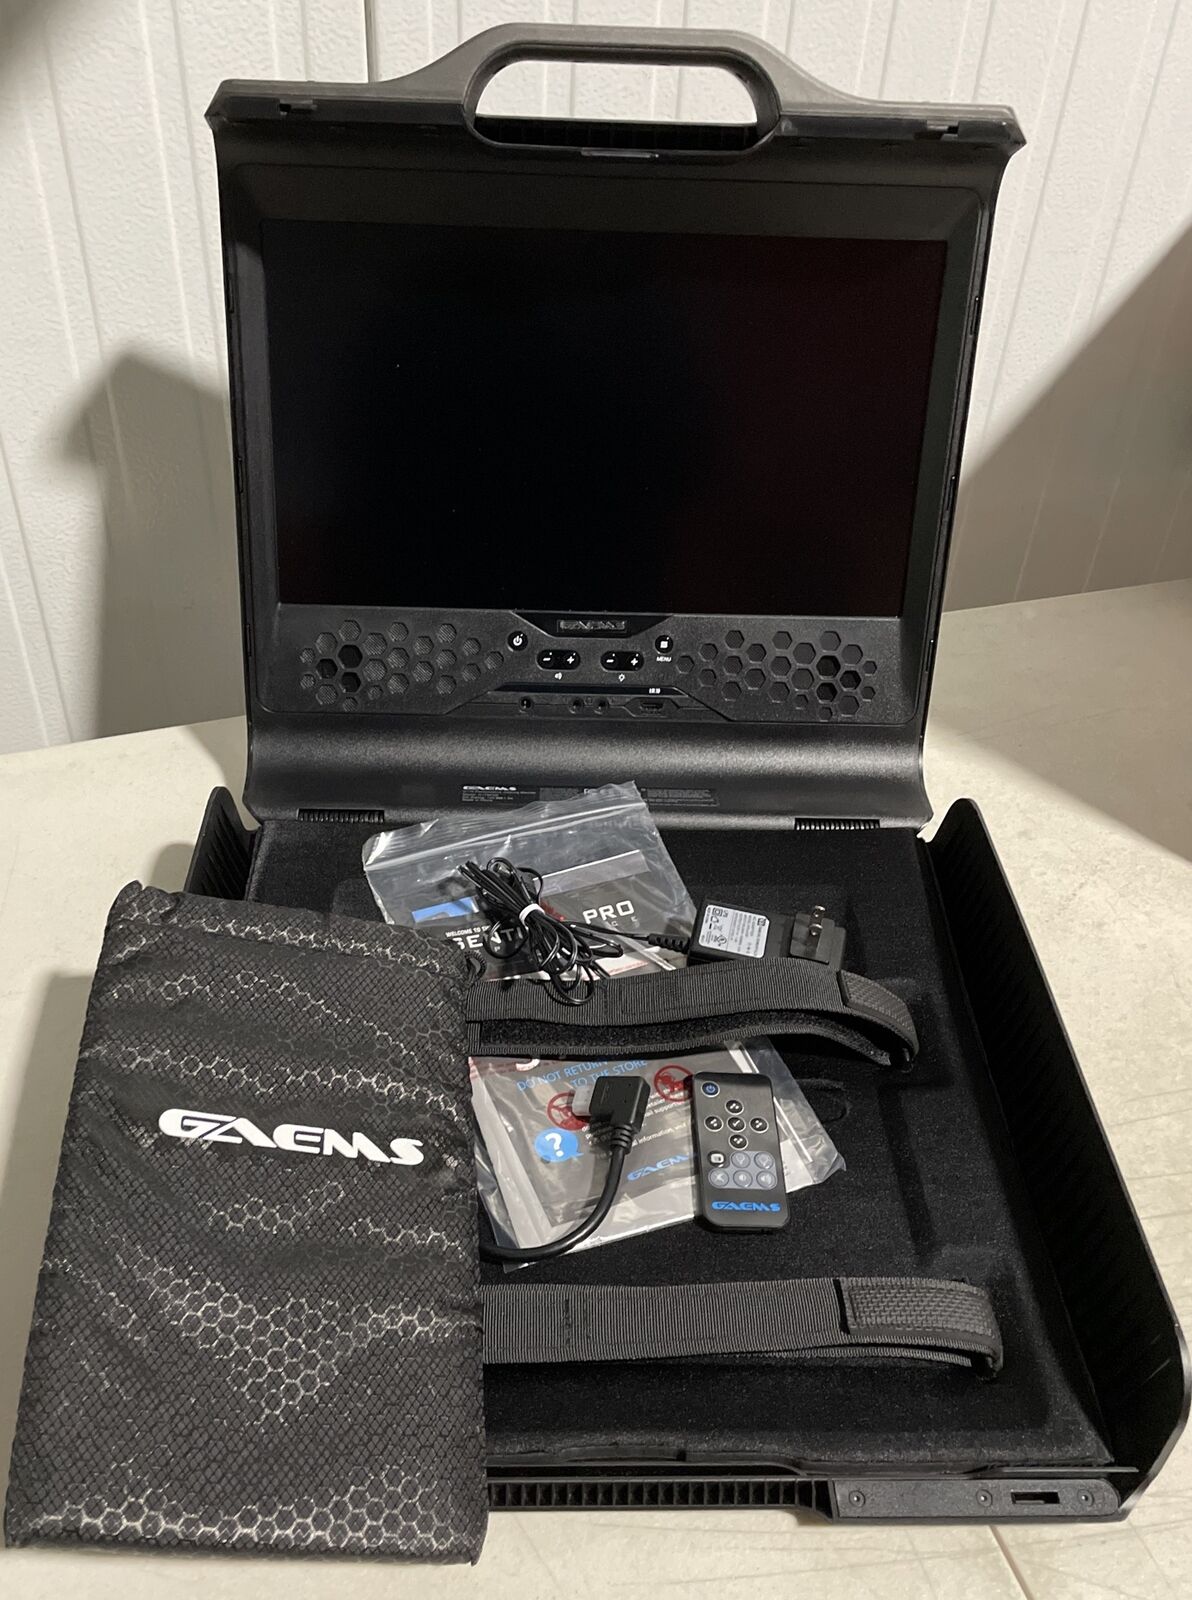 GAEMS G170FHD Sentinel Pro XP 1080P Portable Gaming Monitor - AS IS FOR PARTS